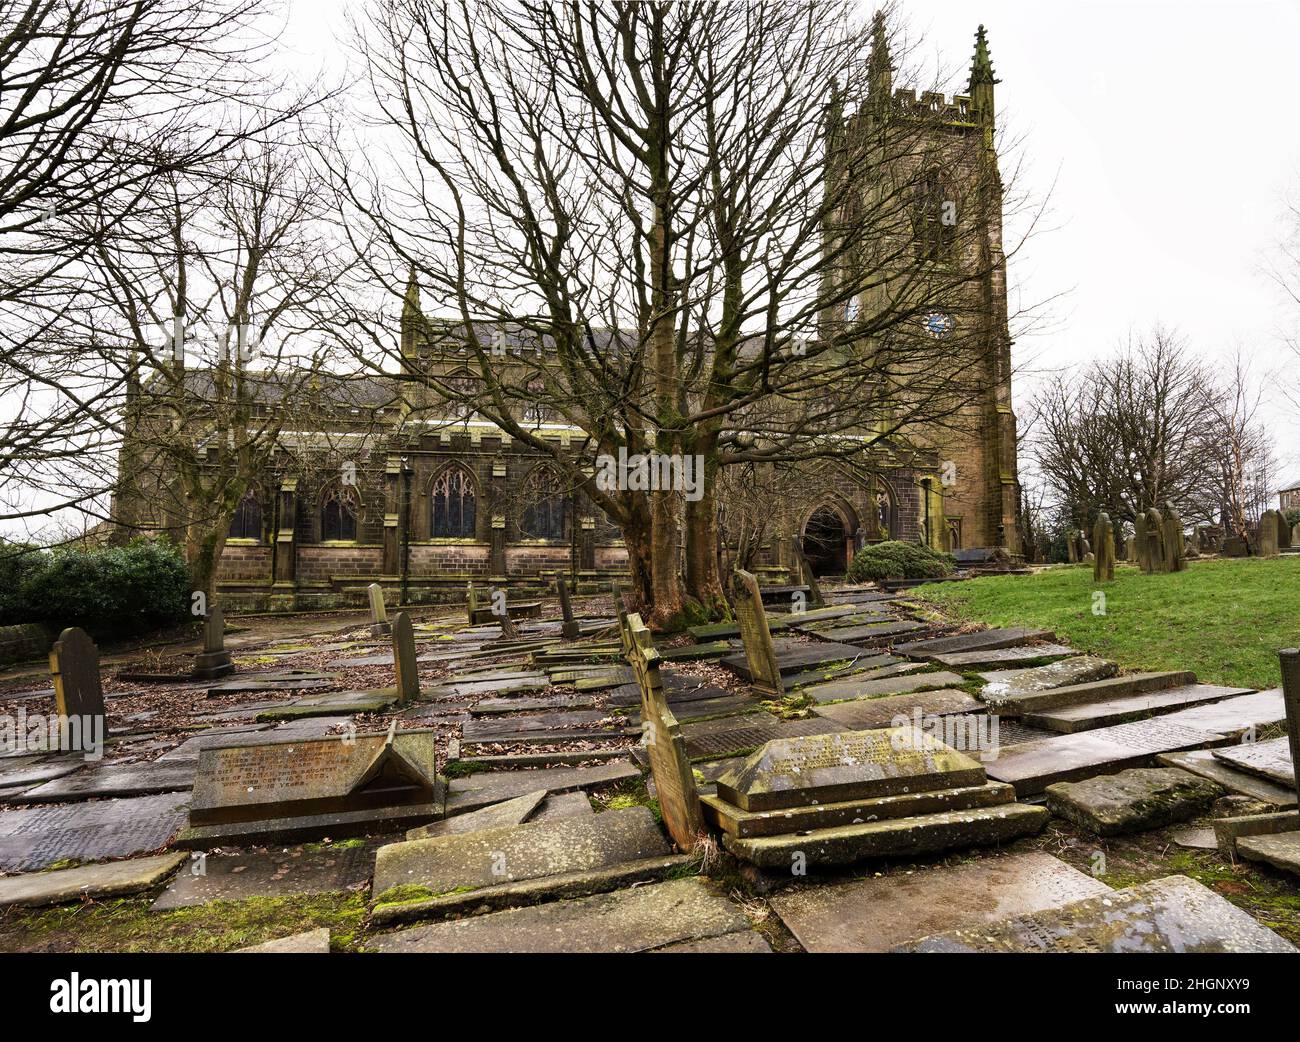 The church of St Thomas the Apostle, Heptonstall, West Yorkshire, UK Stock Photo